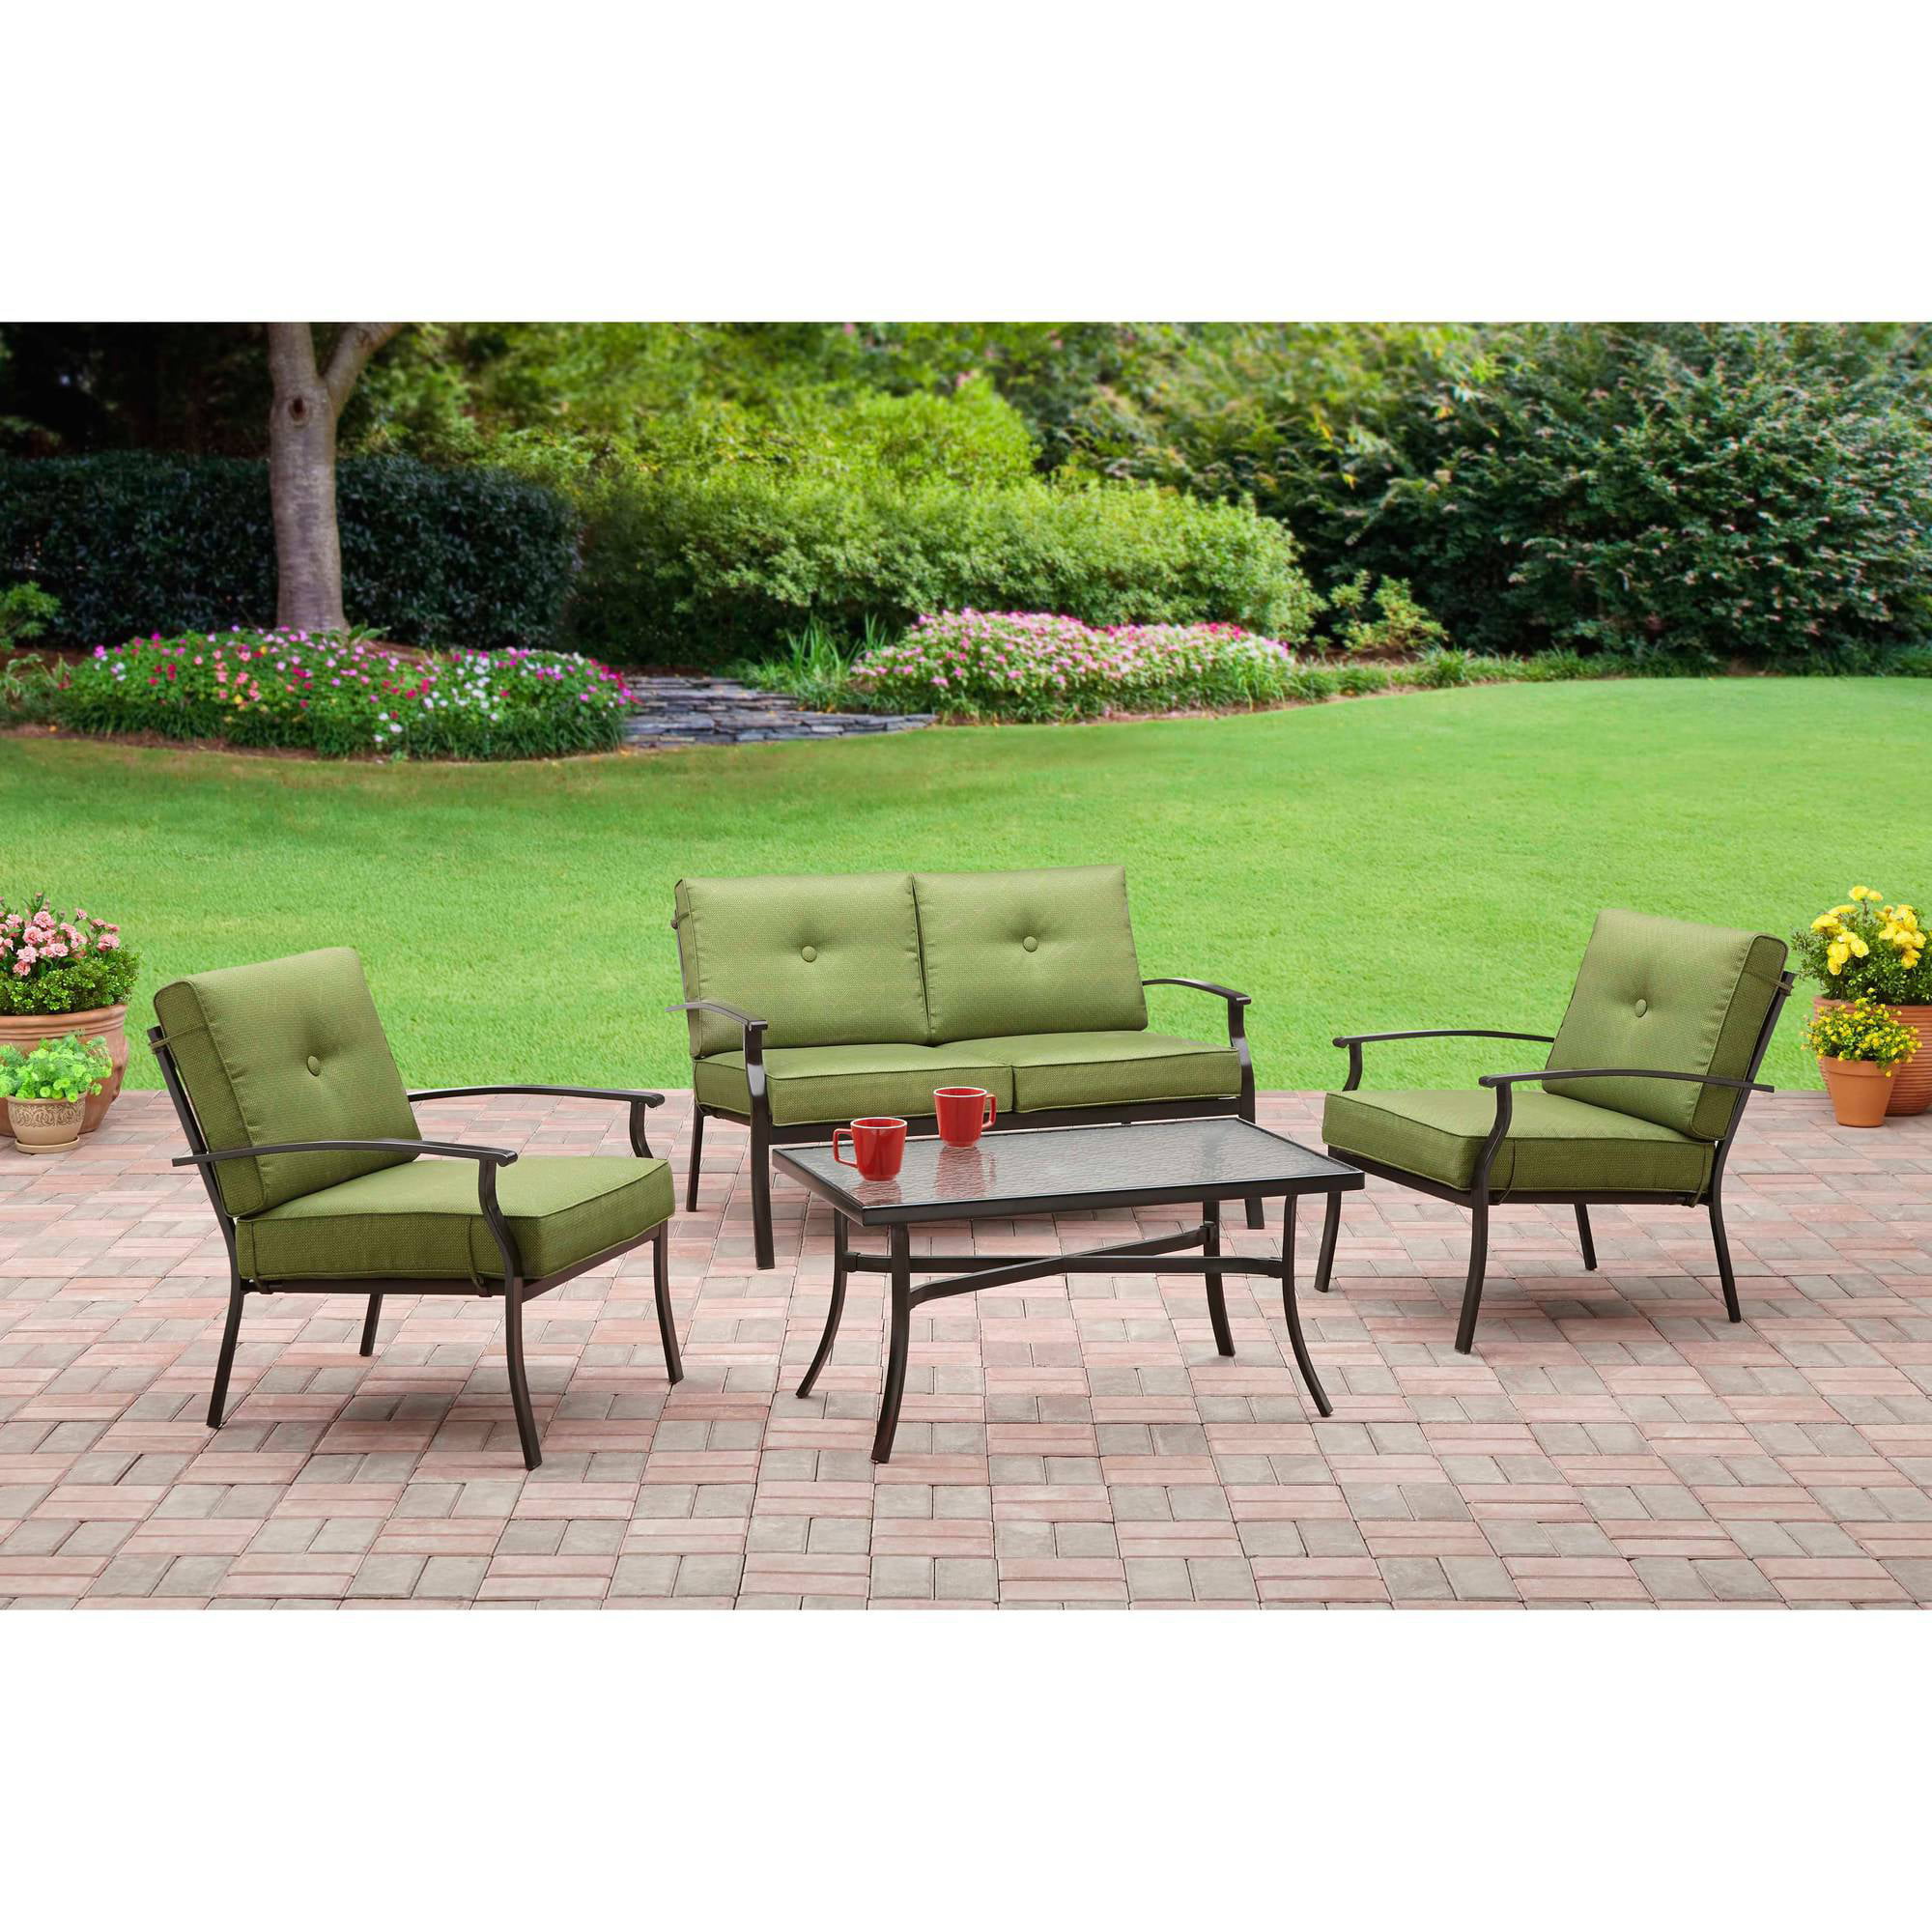 Mainstays Bellingham 4 Piece Patio Conversation Set Seats 4 with The Most Incredible  mainstays alexandra square 4piece patio conversation set grey with leaves for  House